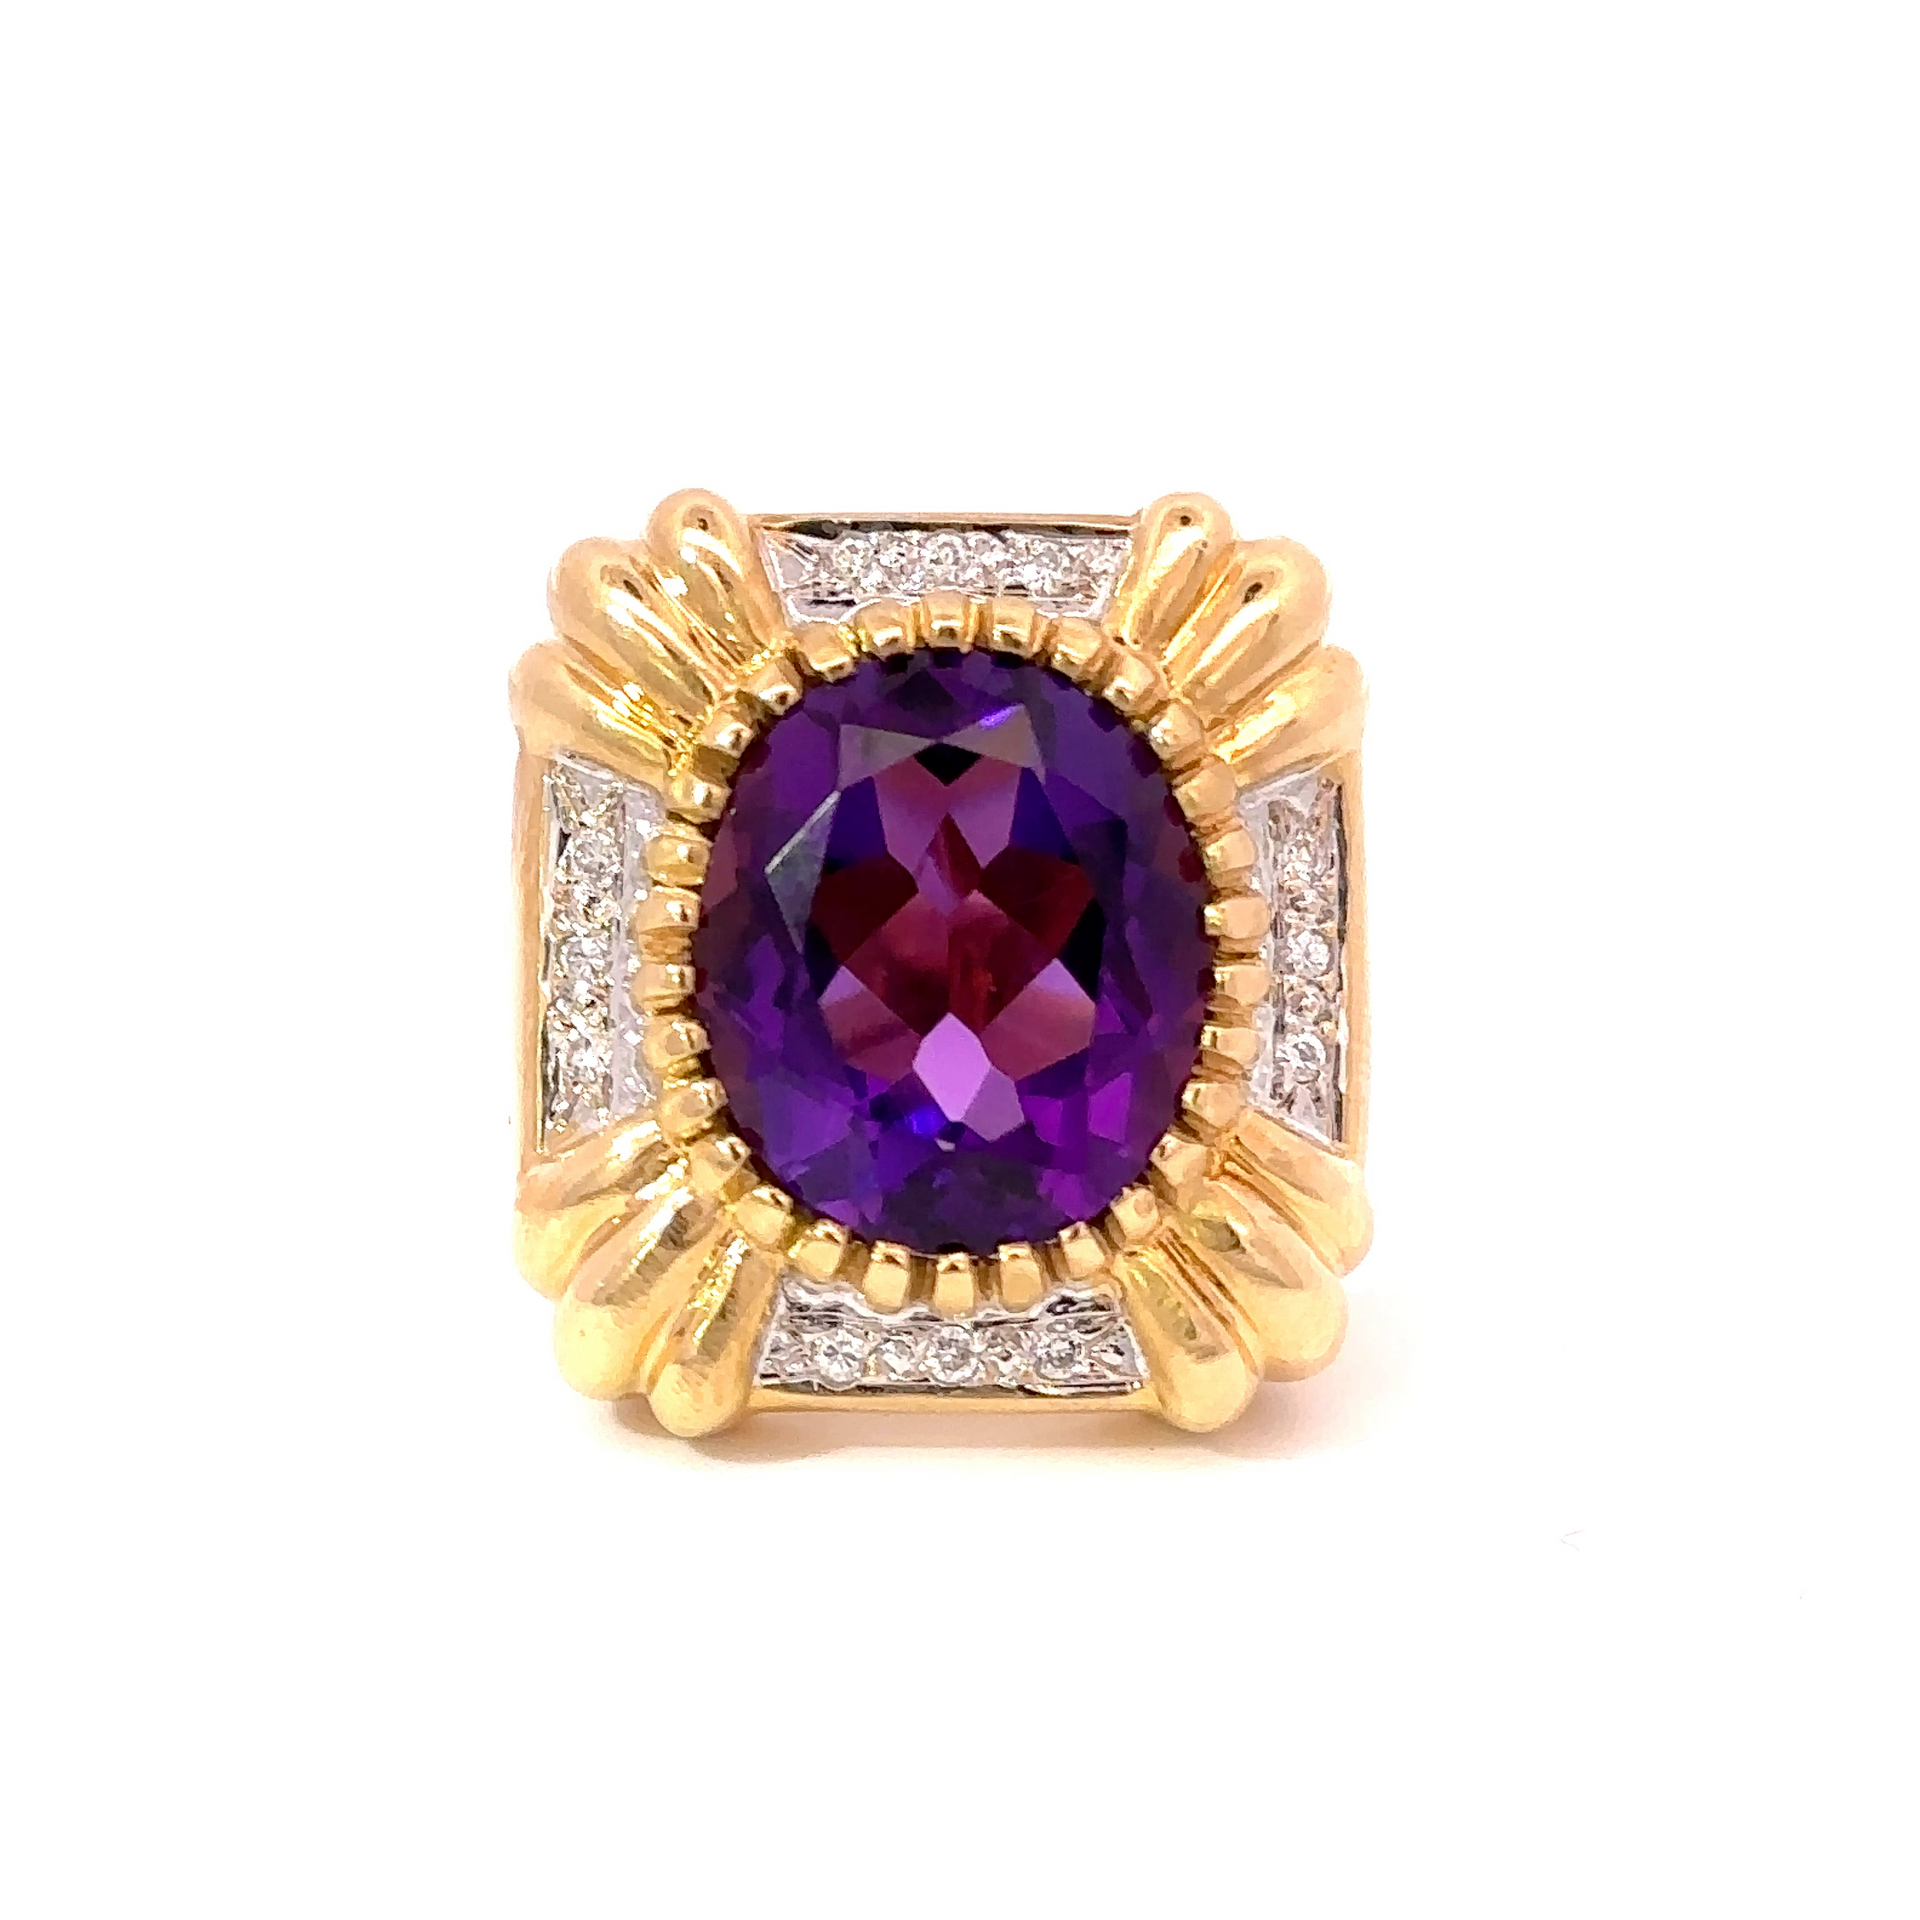 Vintage 1970s 18KT Yellow Gold Amethyst And Diamond Ring